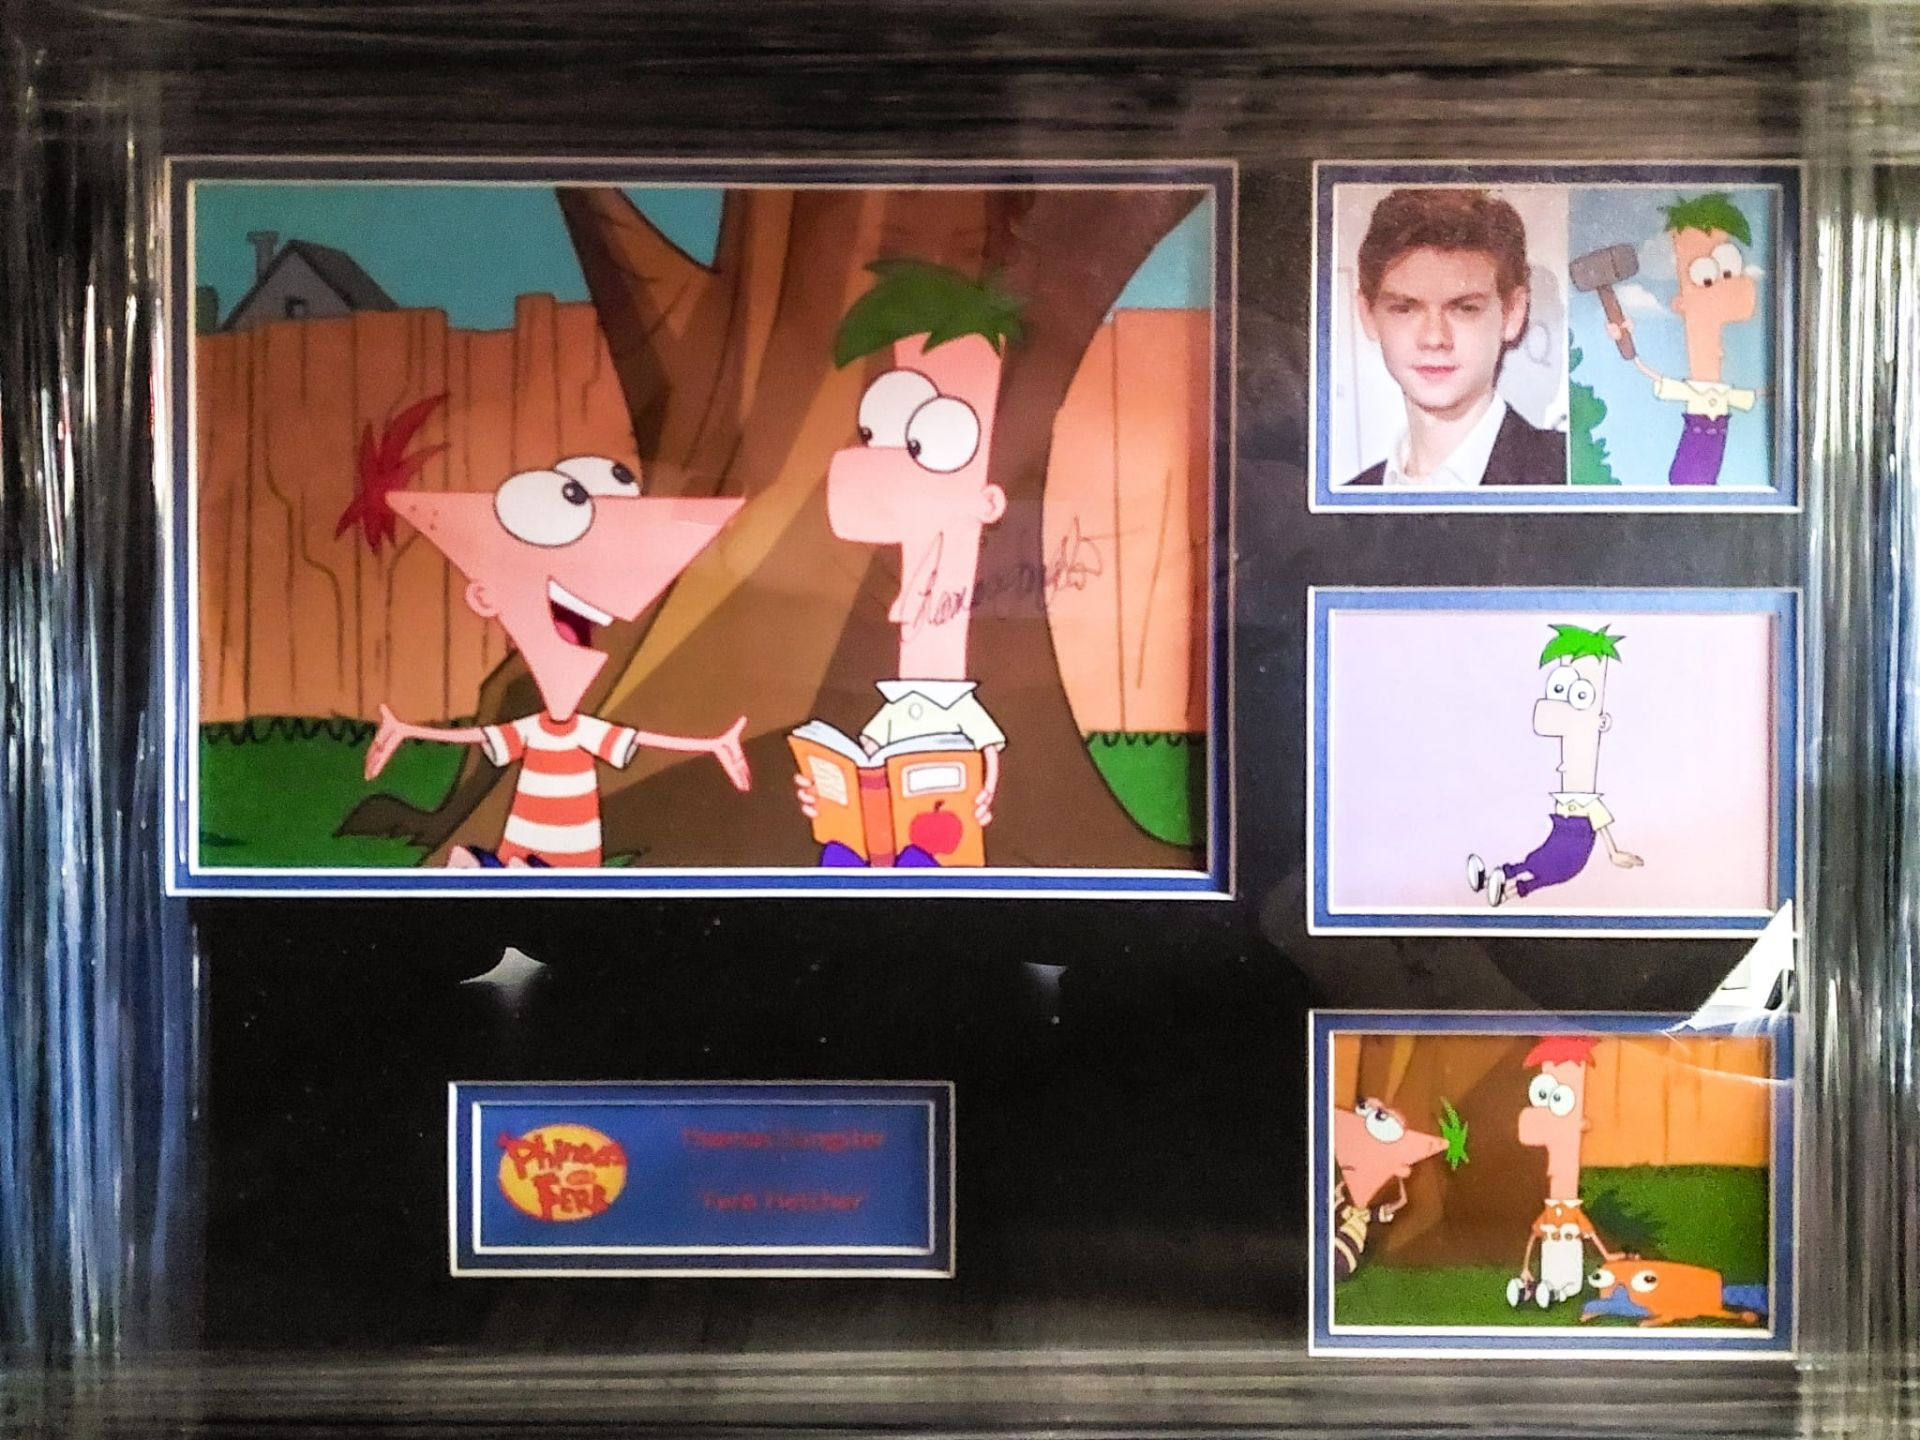 Thomas Sangter Signed And Framed Phineas Ferb Display Supplied with Certificate Of Authenticity